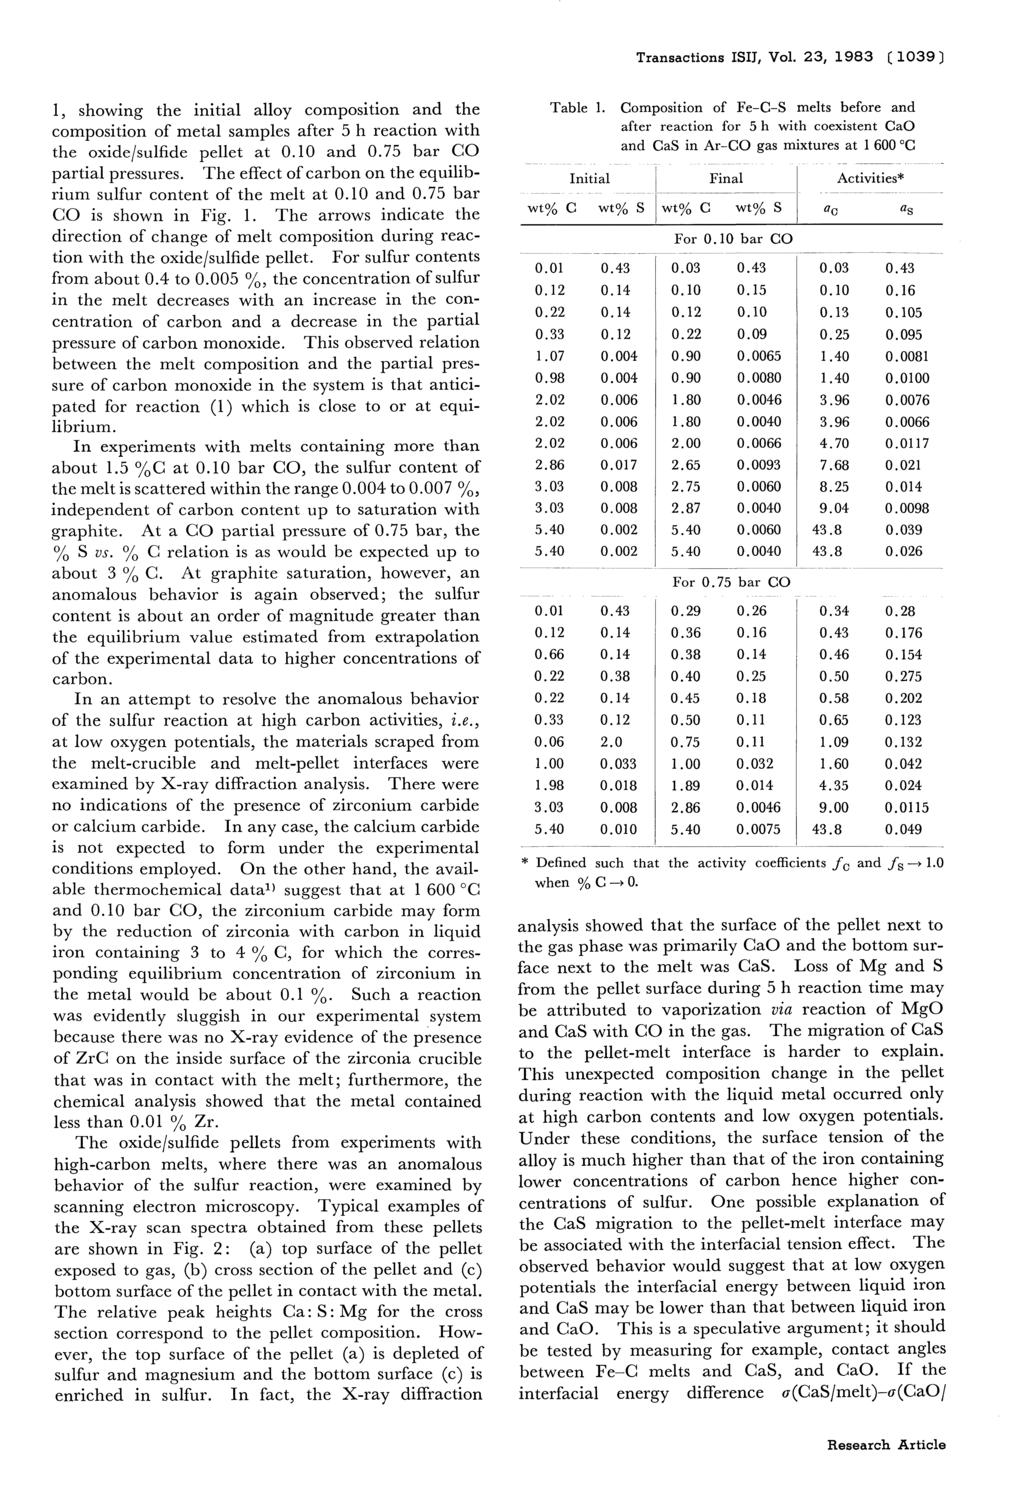 Transactions ISIJ, Vol. 23, 1983 (1039) 1, showing the initial alloy composition and the composition of metal samples after 5 h reaction with the oxide/sulfide pellet at 0.10 and 0.